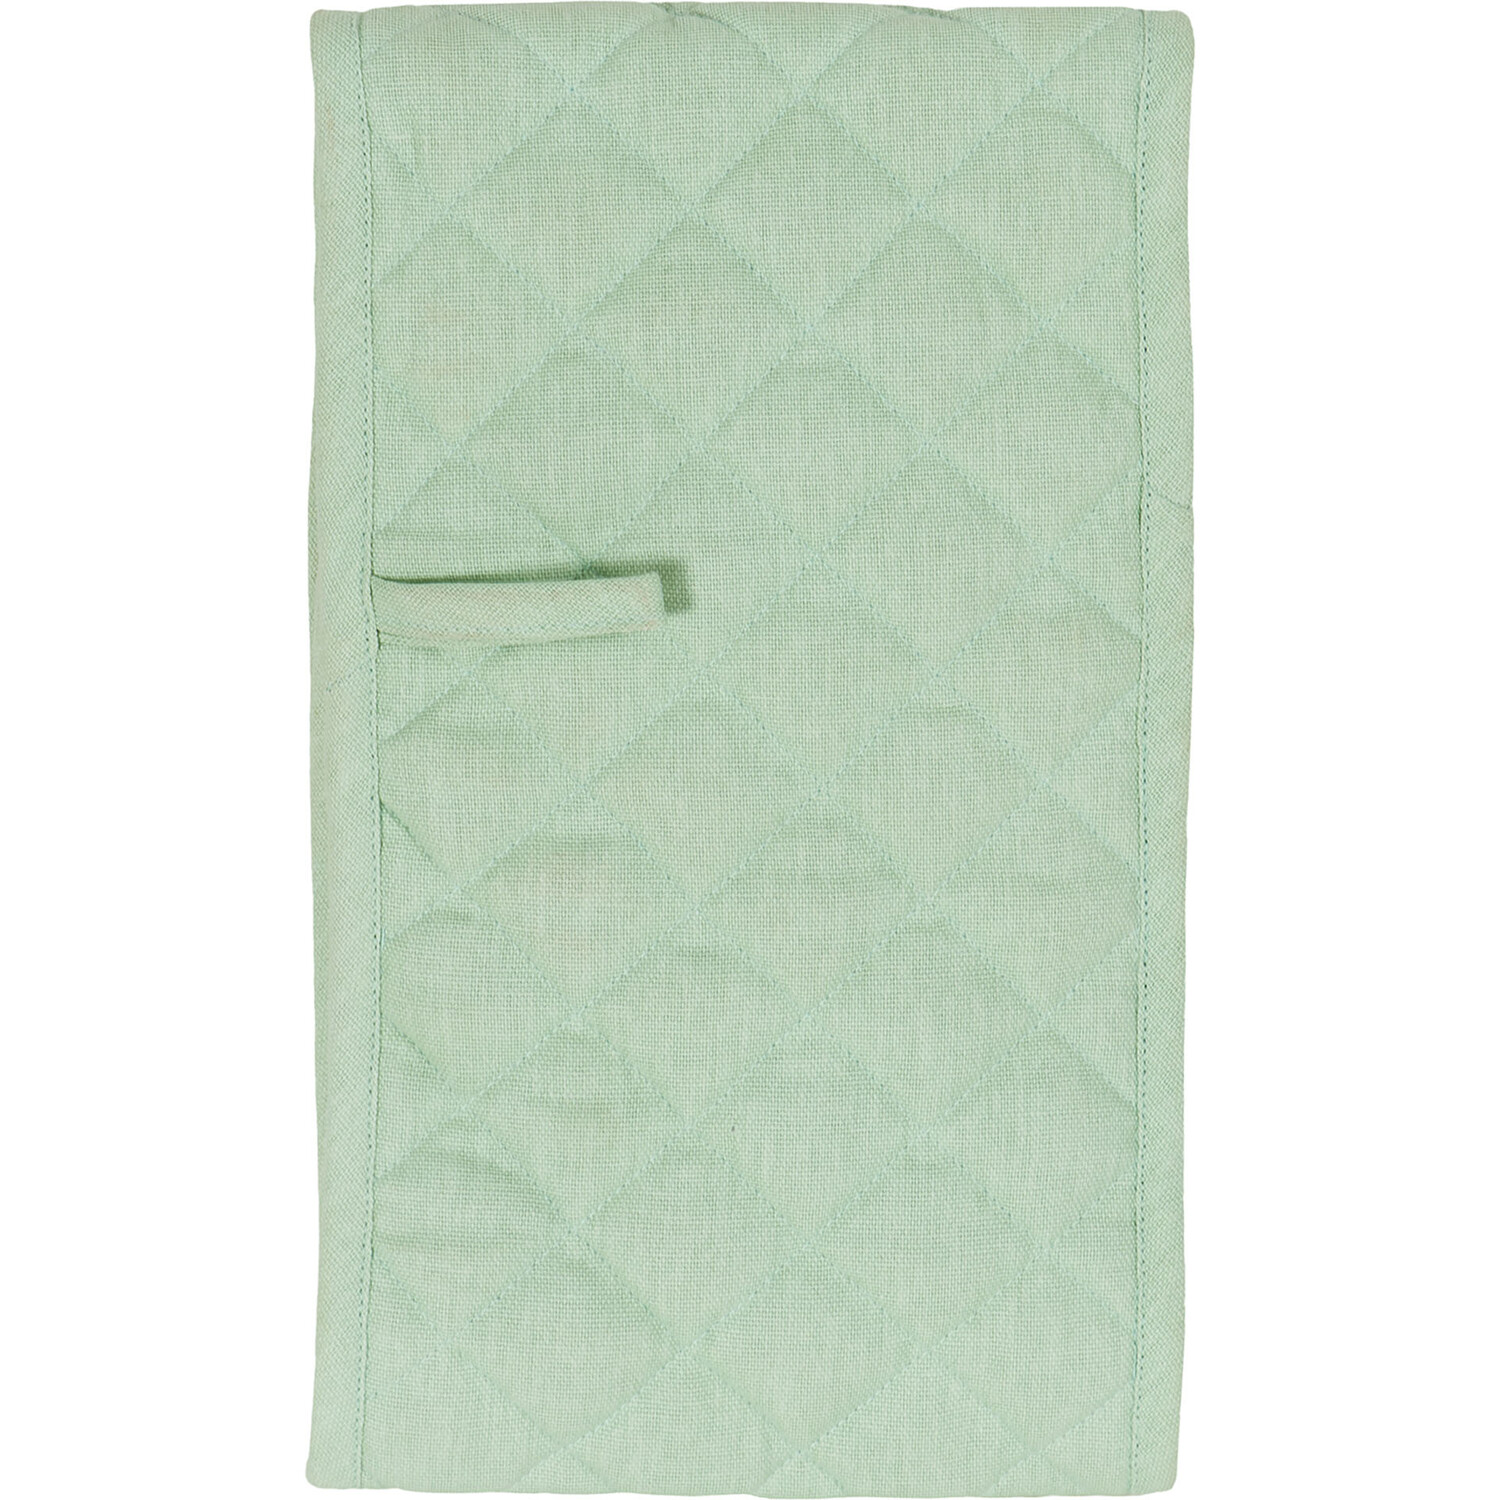 Happy Easter Double Oven Gloves - Green Image 2